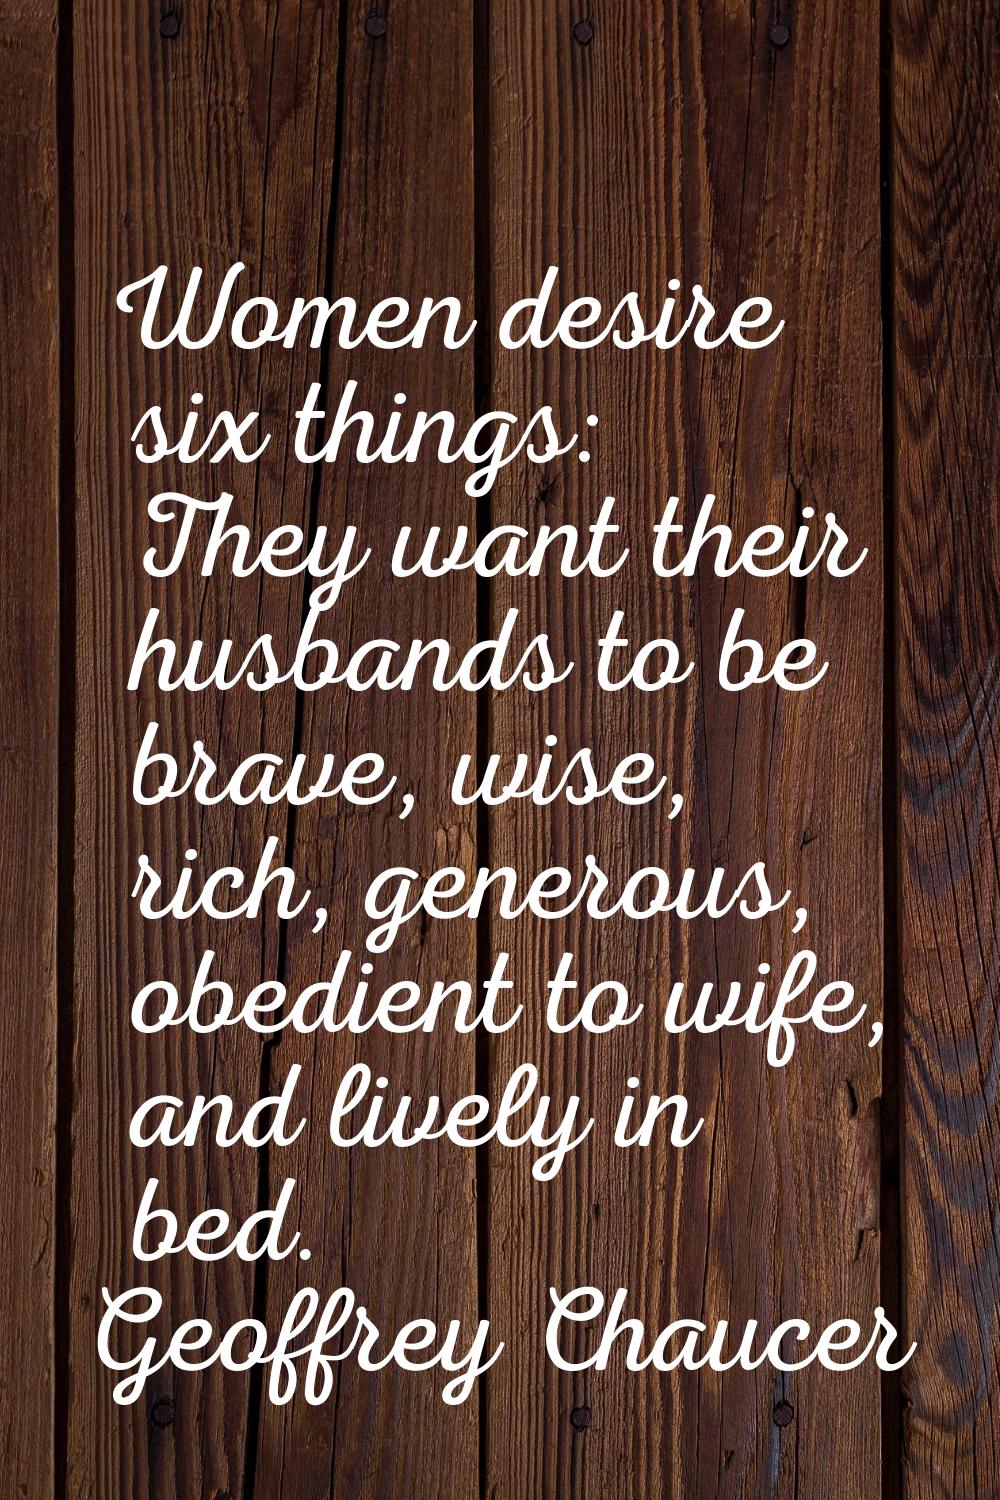 Women desire six things: They want their husbands to be brave, wise, rich, generous, obedient to wi